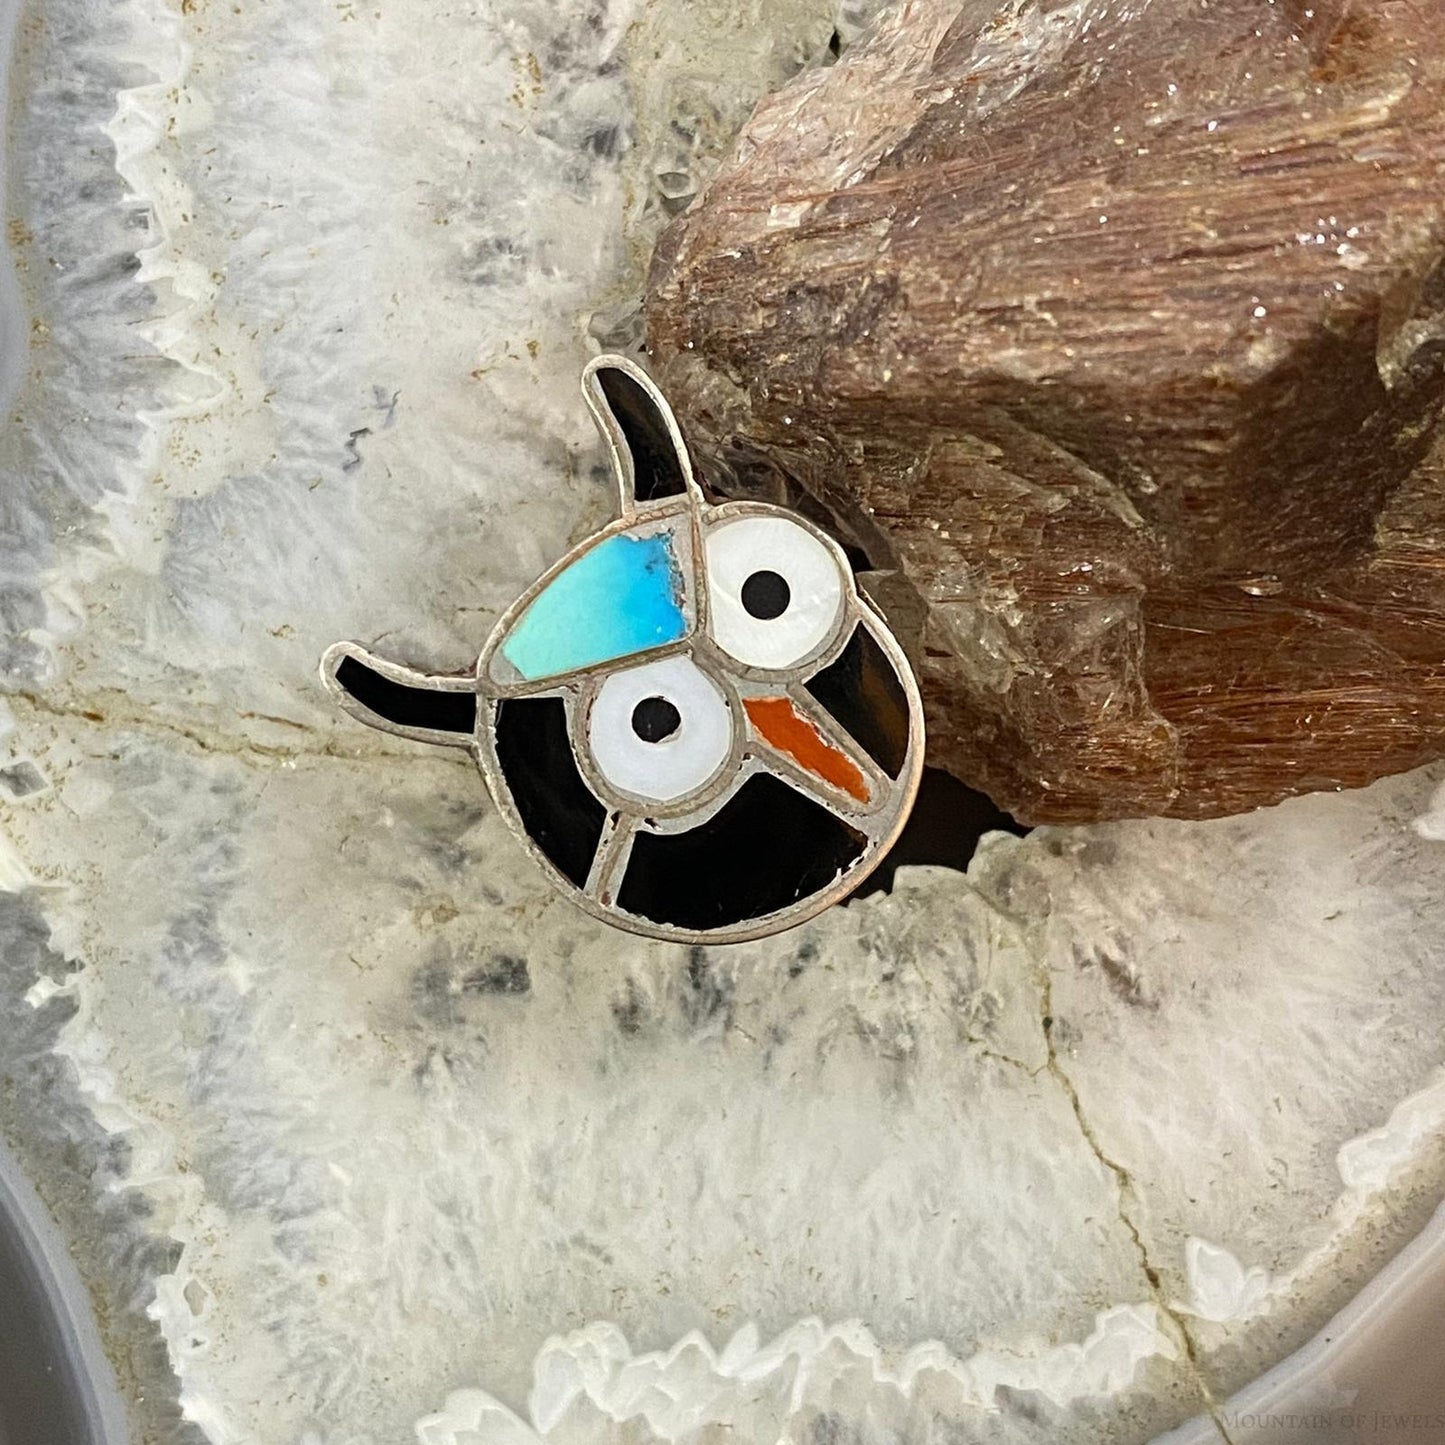 Vintage Native American Silver Multistone Zuni Inlay Owl Ring Size 6.5 For Women